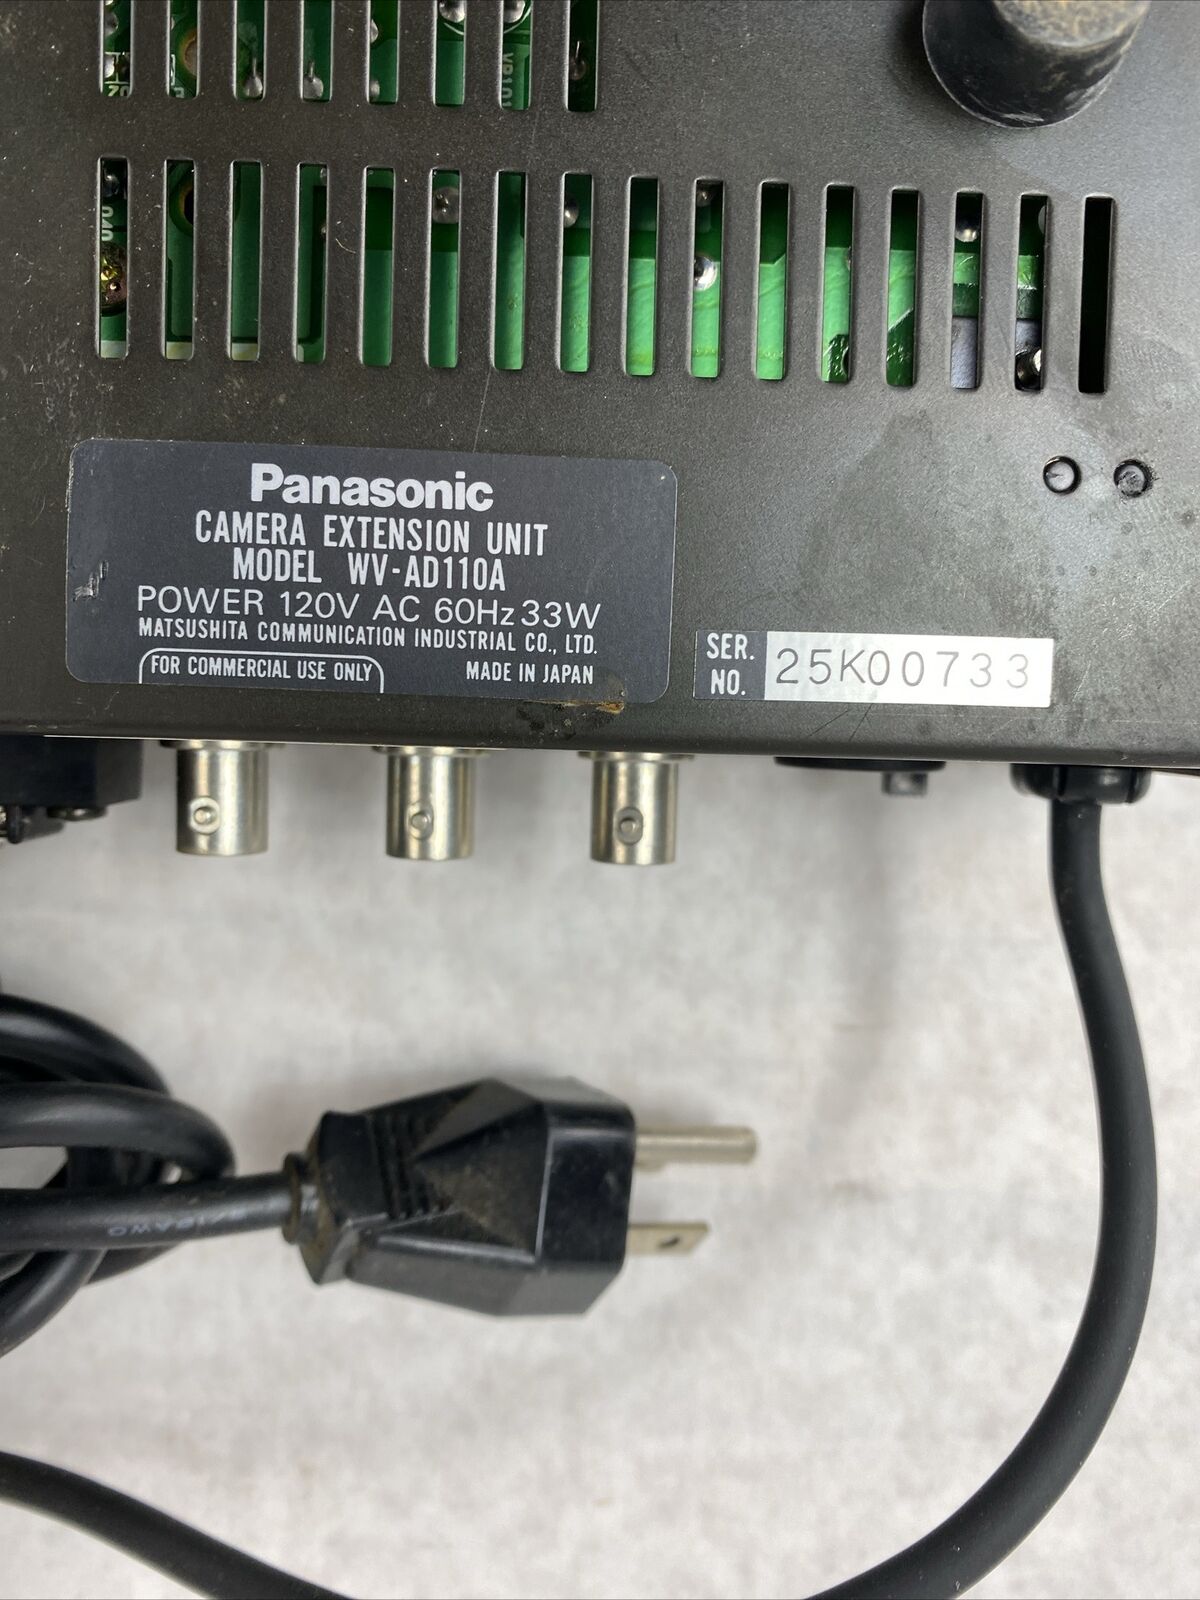 Panasonic Camera Extension Unit Model WV-AD 110A for Camcorder